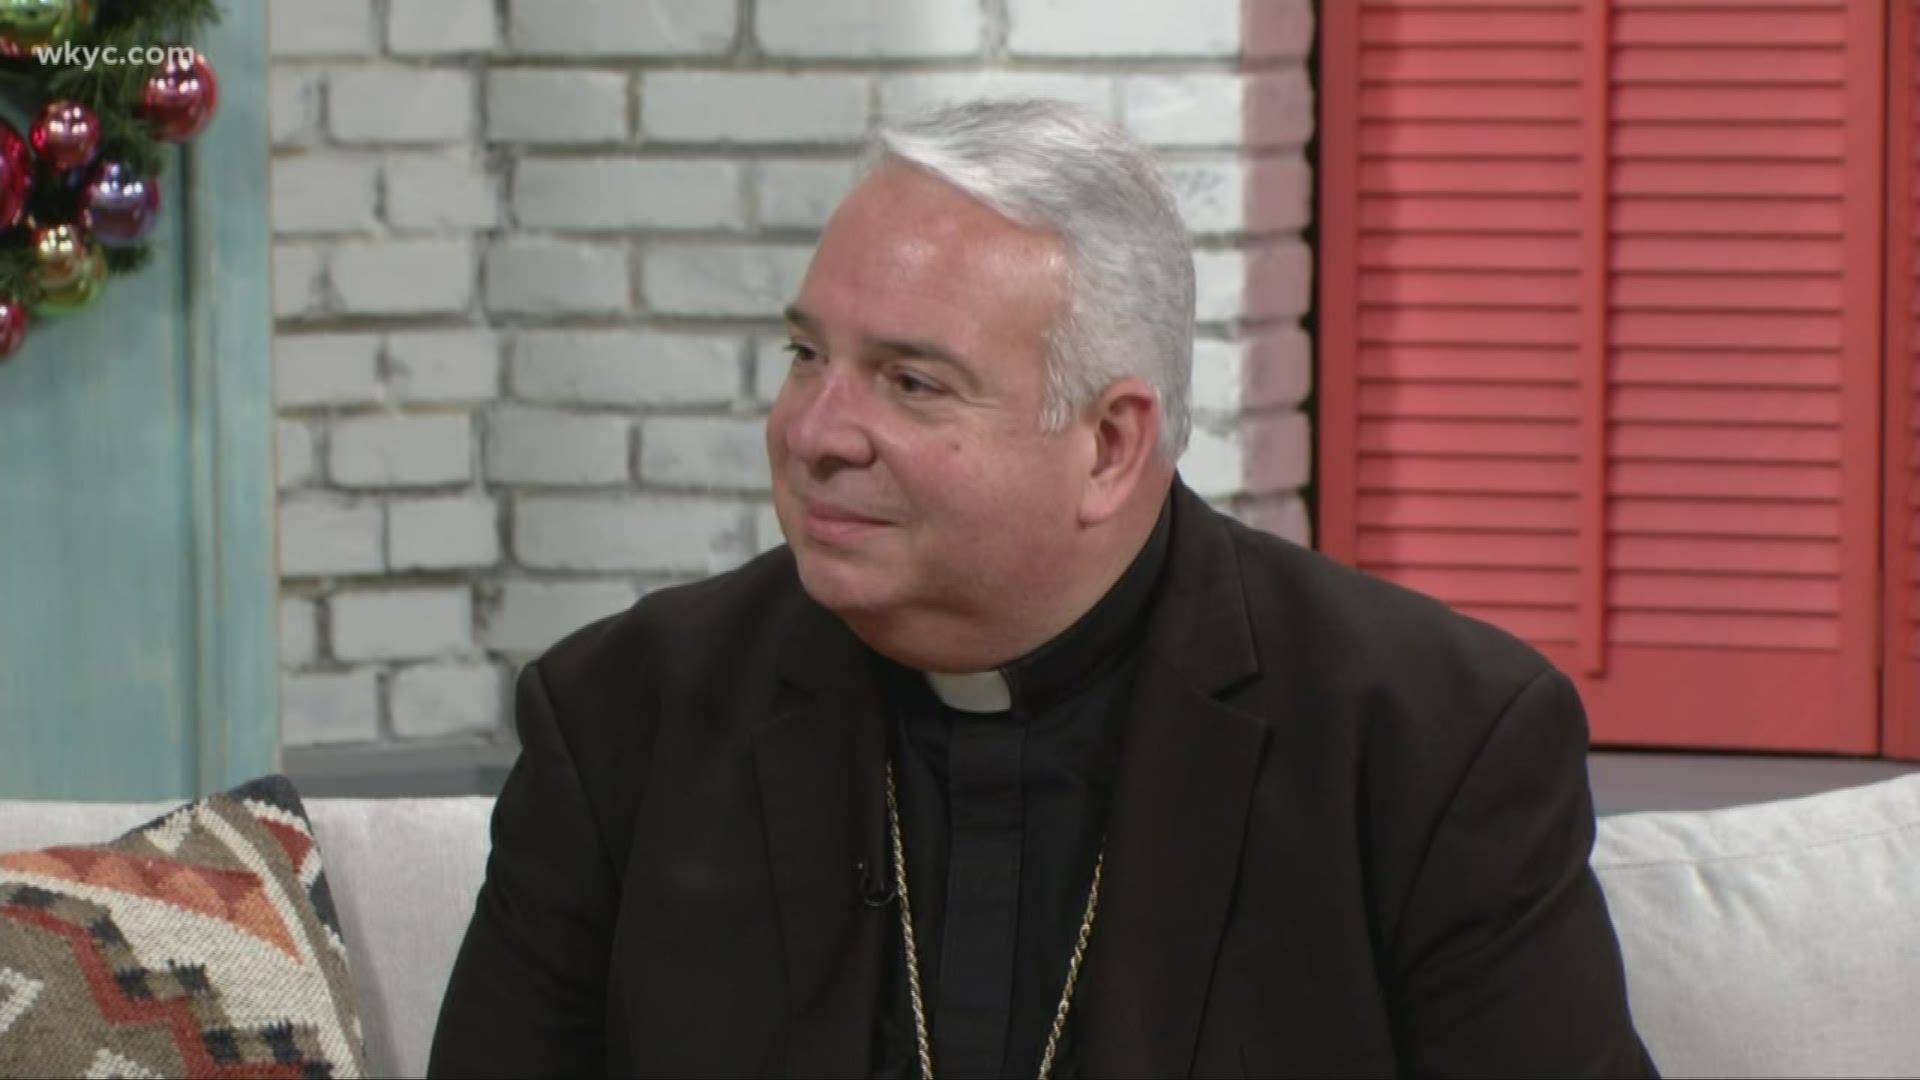 Sara Shookman had a chance to sit down with Cleveland's Catholic Bishop to talk about the state of the church, and share his message for the community this season.